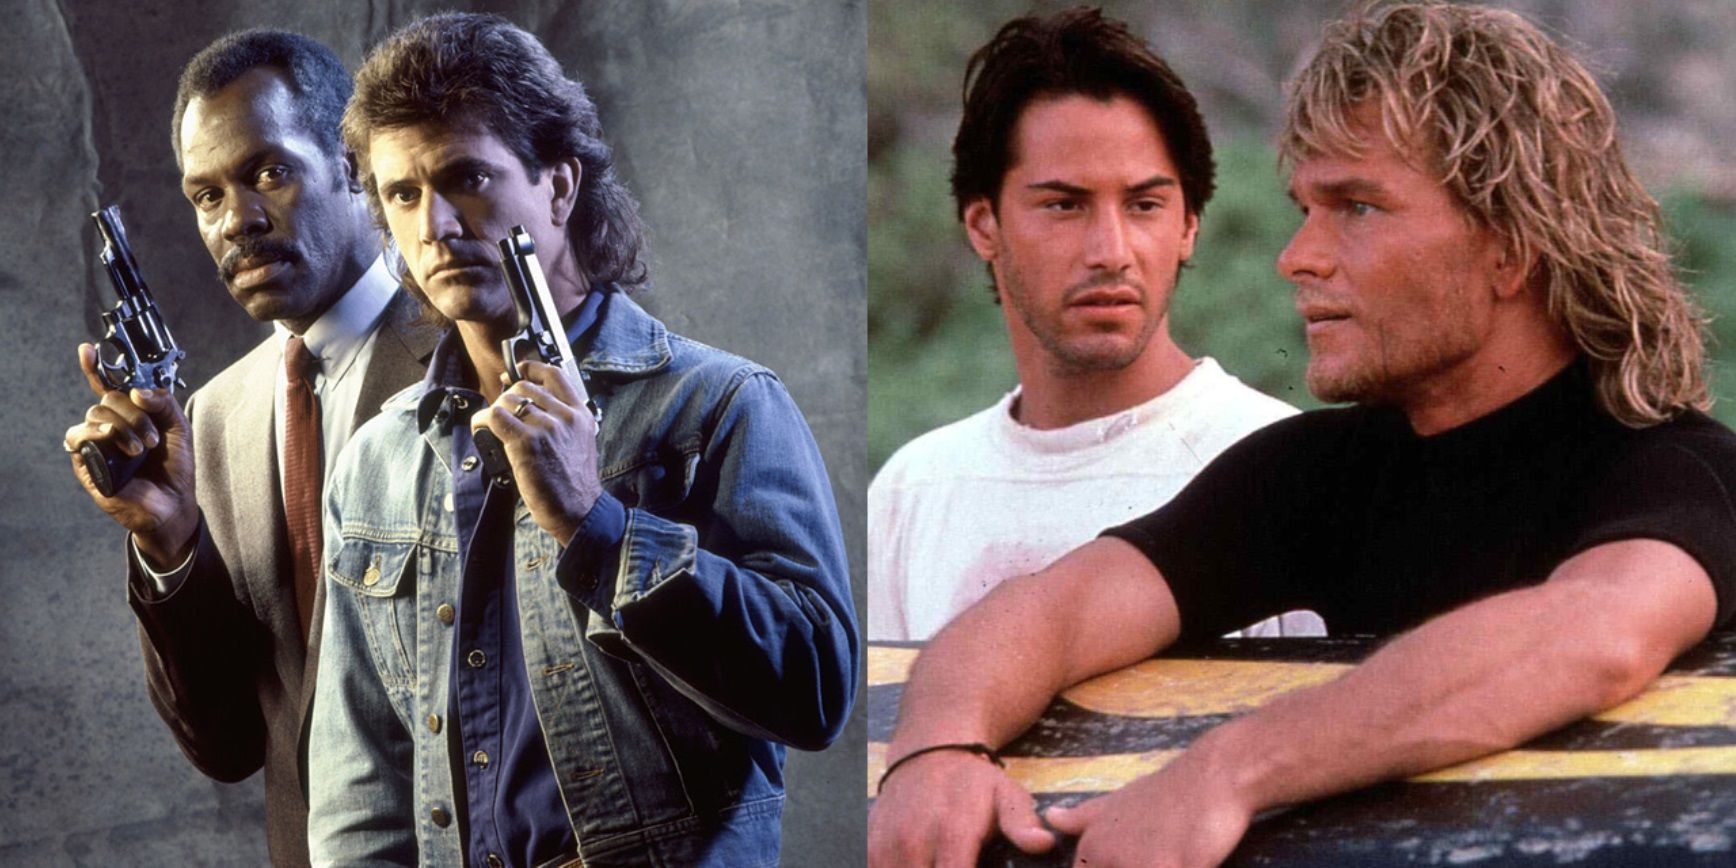 Split image of Riggs and Murtaugh in Lethal Weapon and Johnny Utah and Bodhi in Point Break